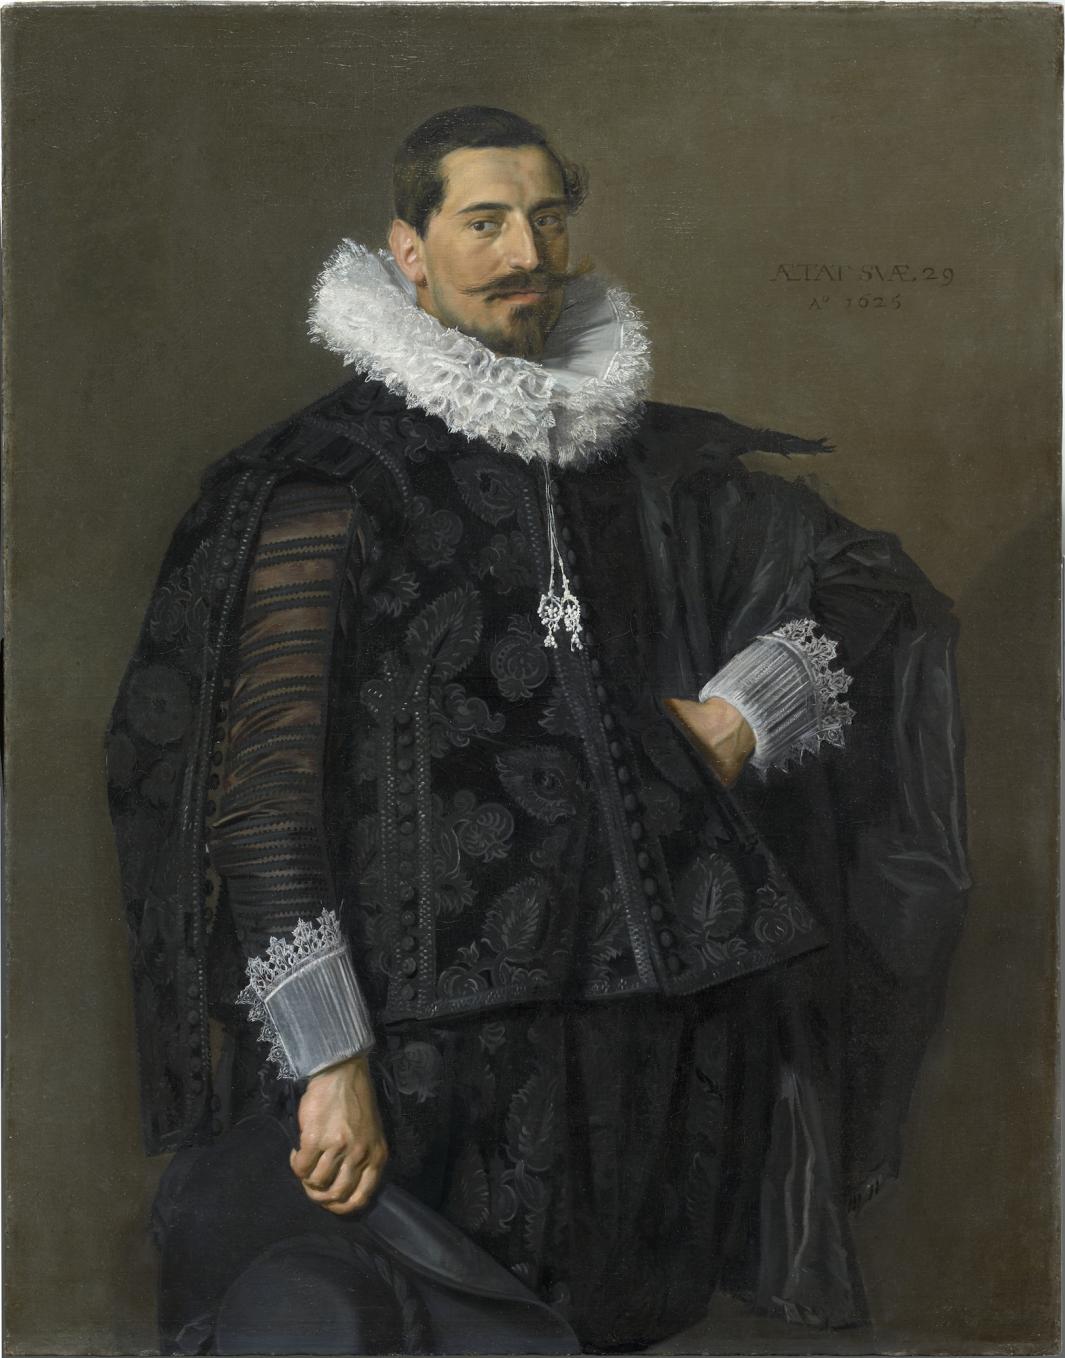 Painted portrait of a bearded man wearing black clothing with white lace cuffs and a white neck ruff.